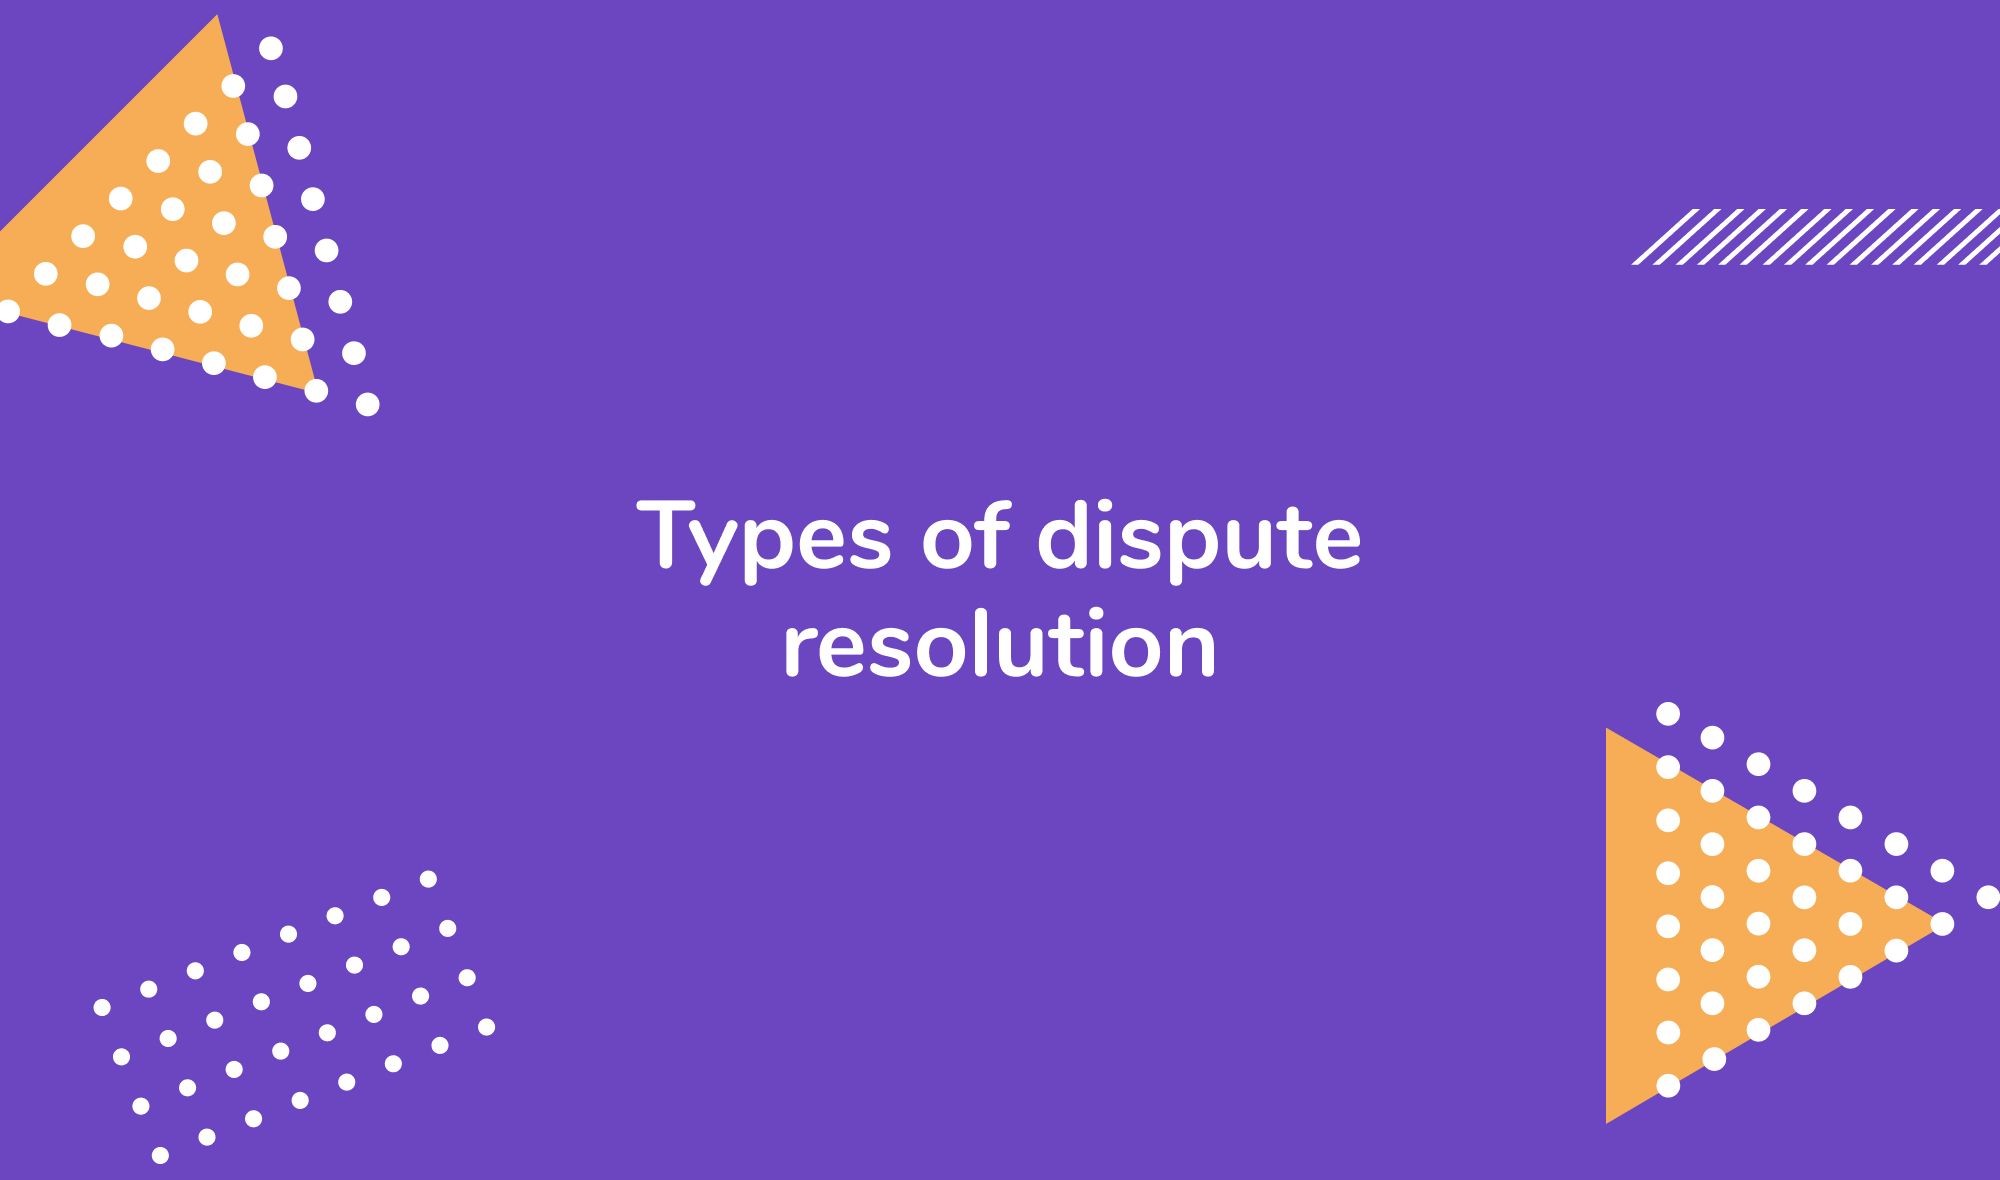 Types of dispute resolution